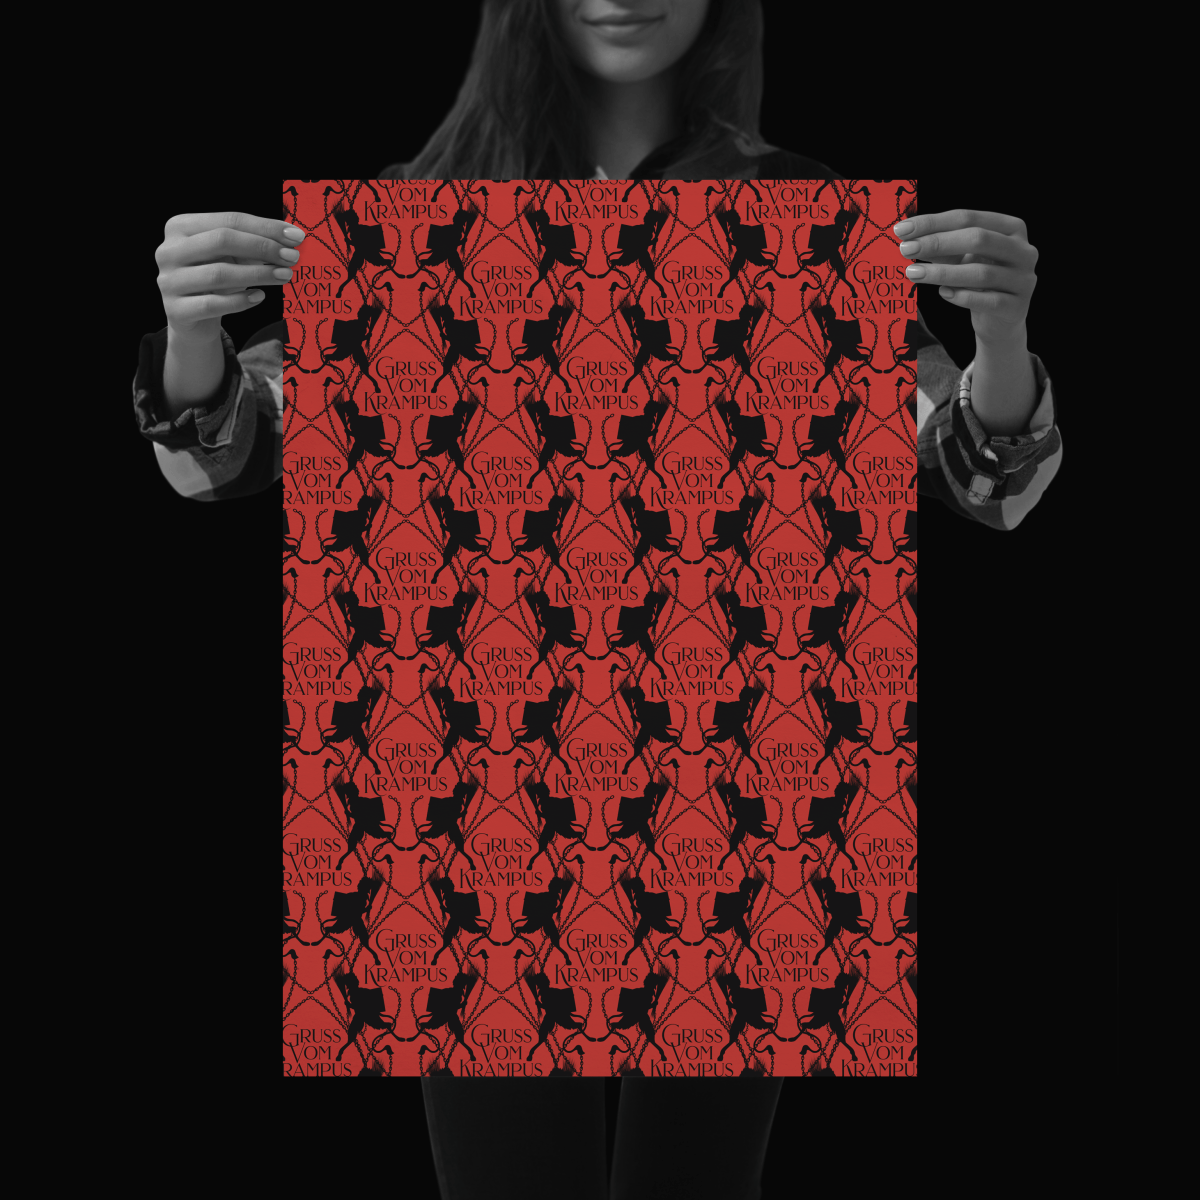 Gruss Vom Krampus Red & Black Wrapping Paper| Gothic Christmas Gift Wrap - The Gothic Stationery Company - Gift Wrap